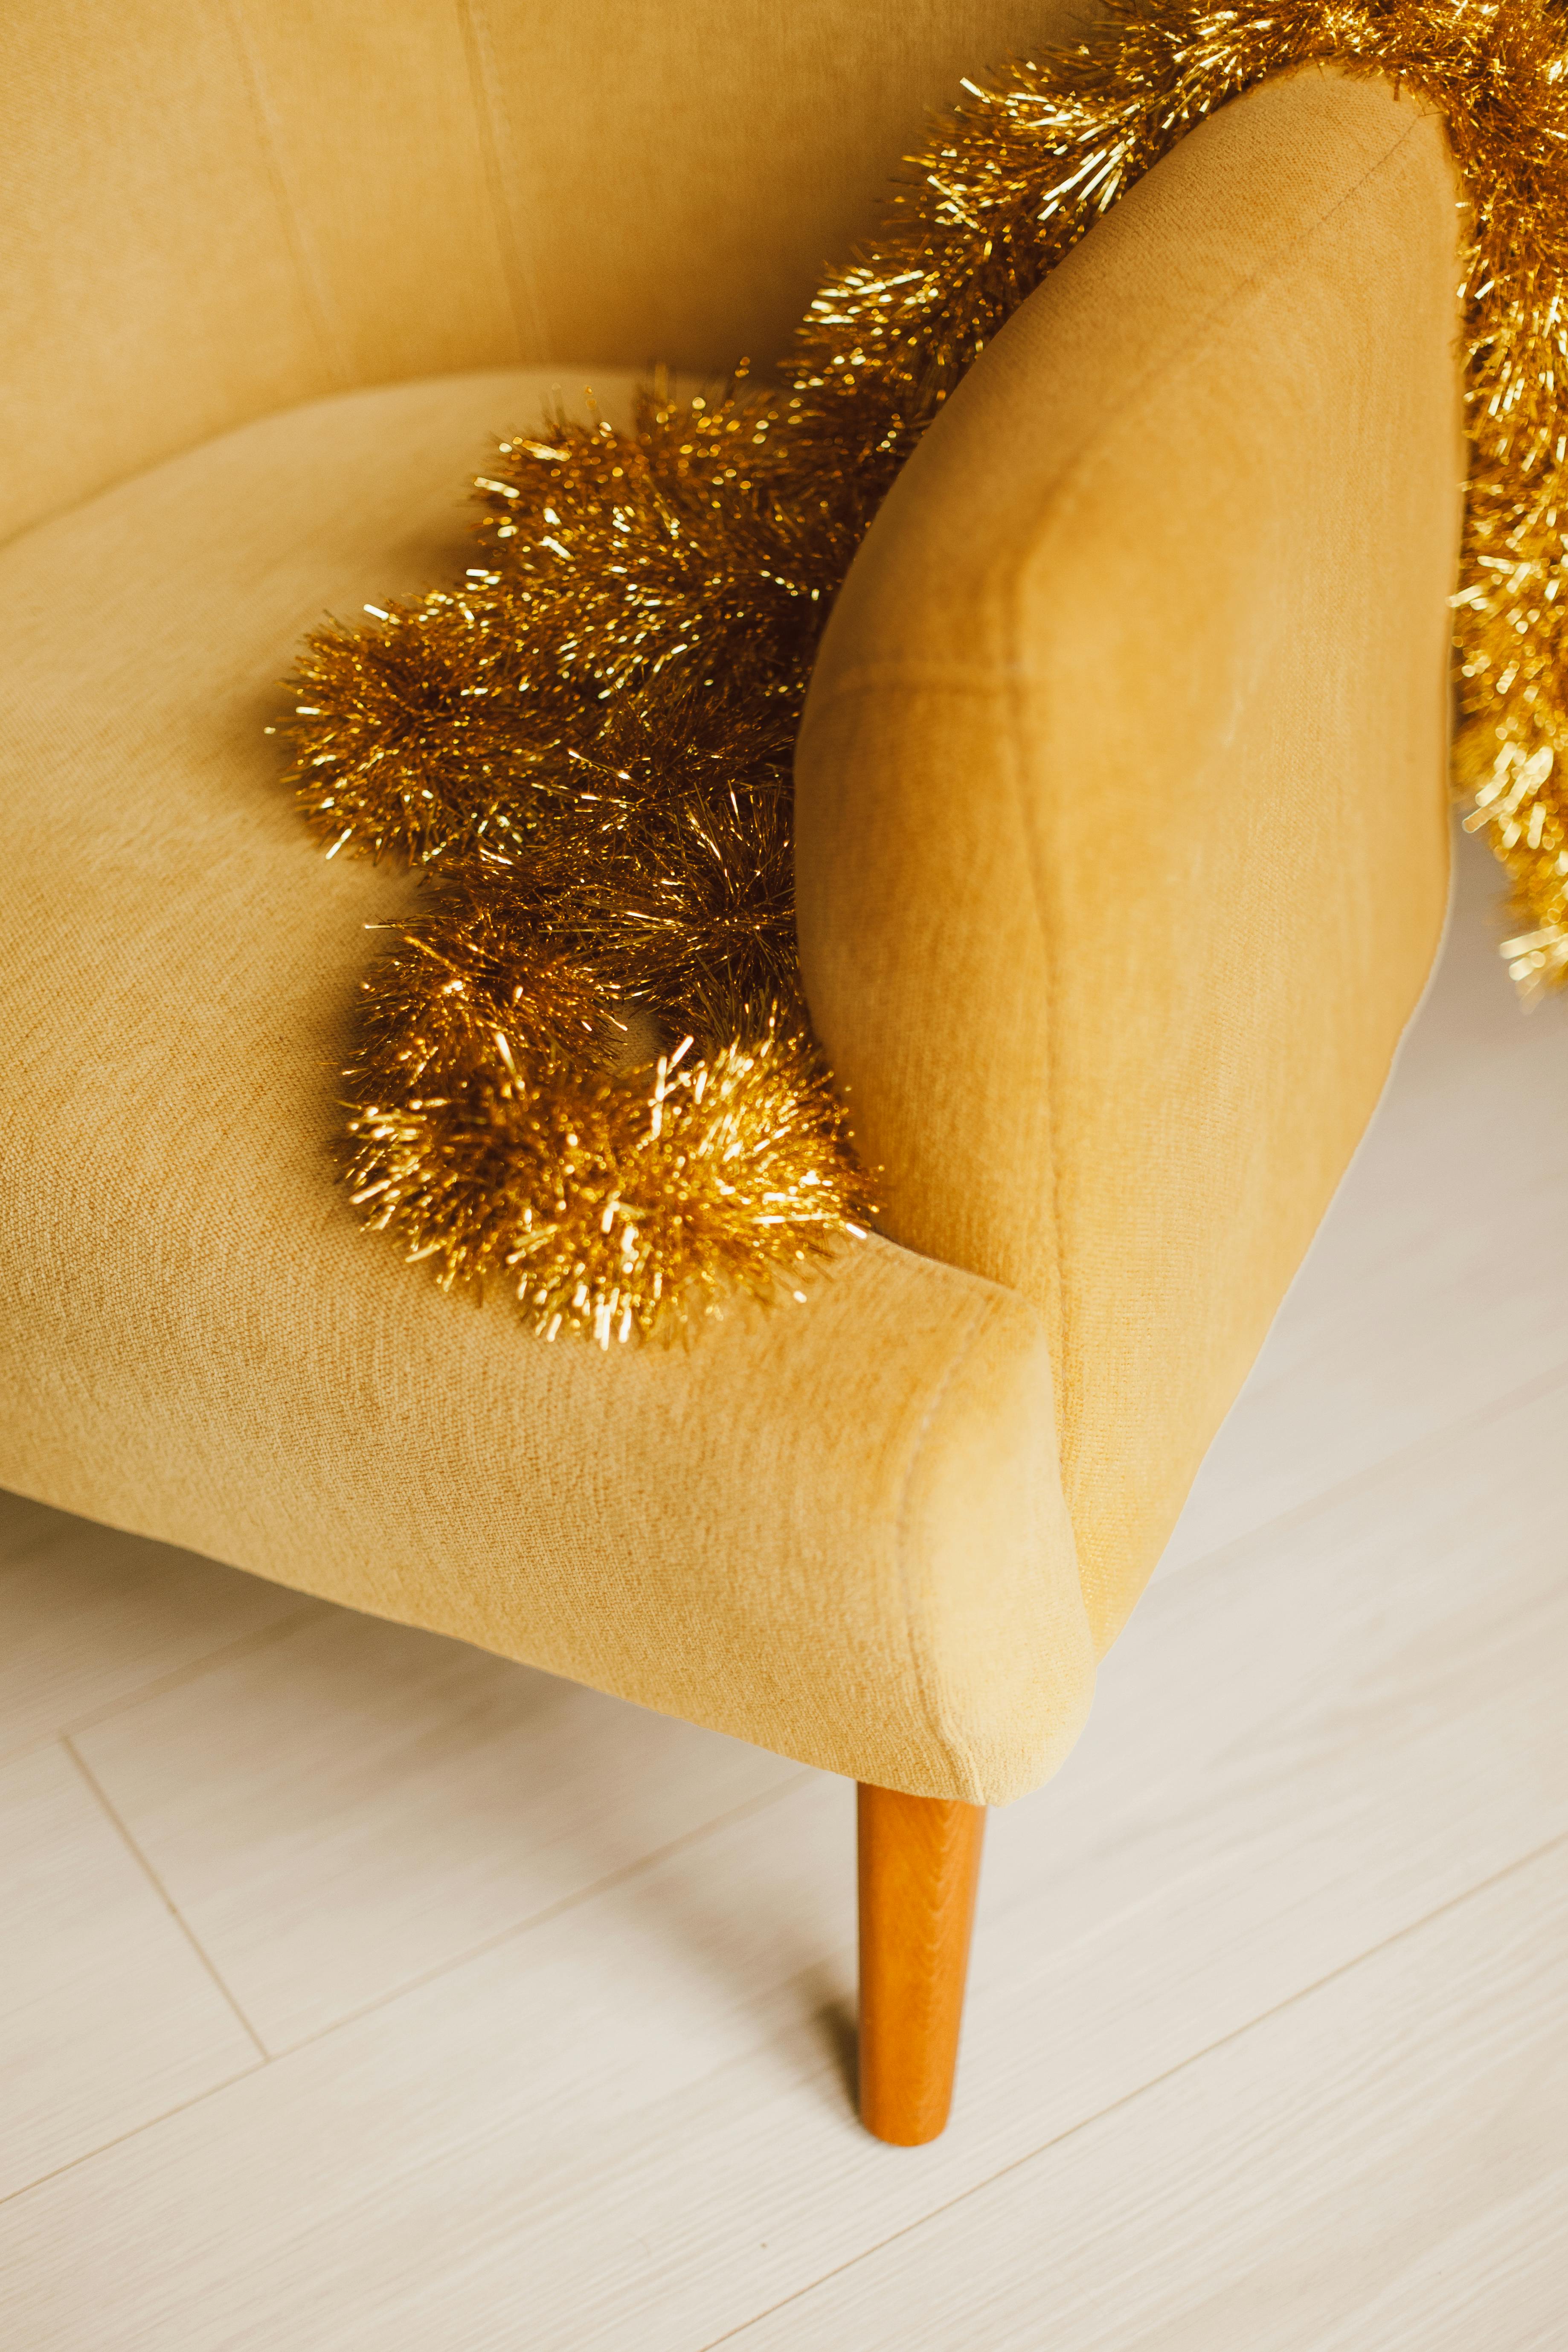 golden christmas tree decoration lying on yellow chair